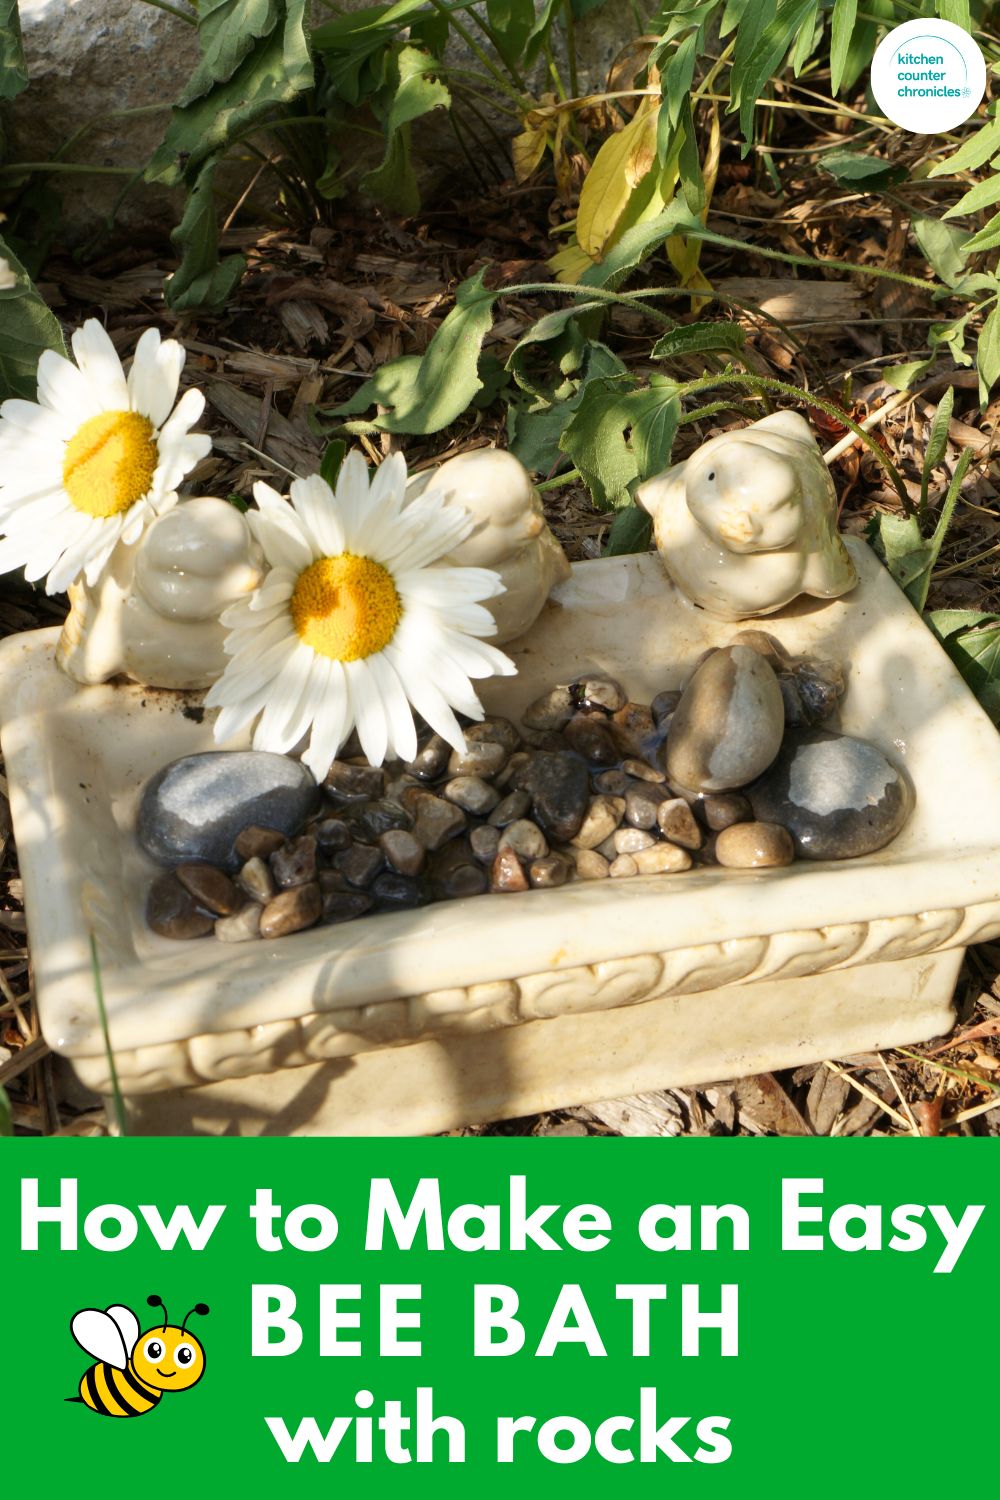 title "how to make a bee bath with rocks" image of a bee bath in a garden surrounded by plants and flowers.